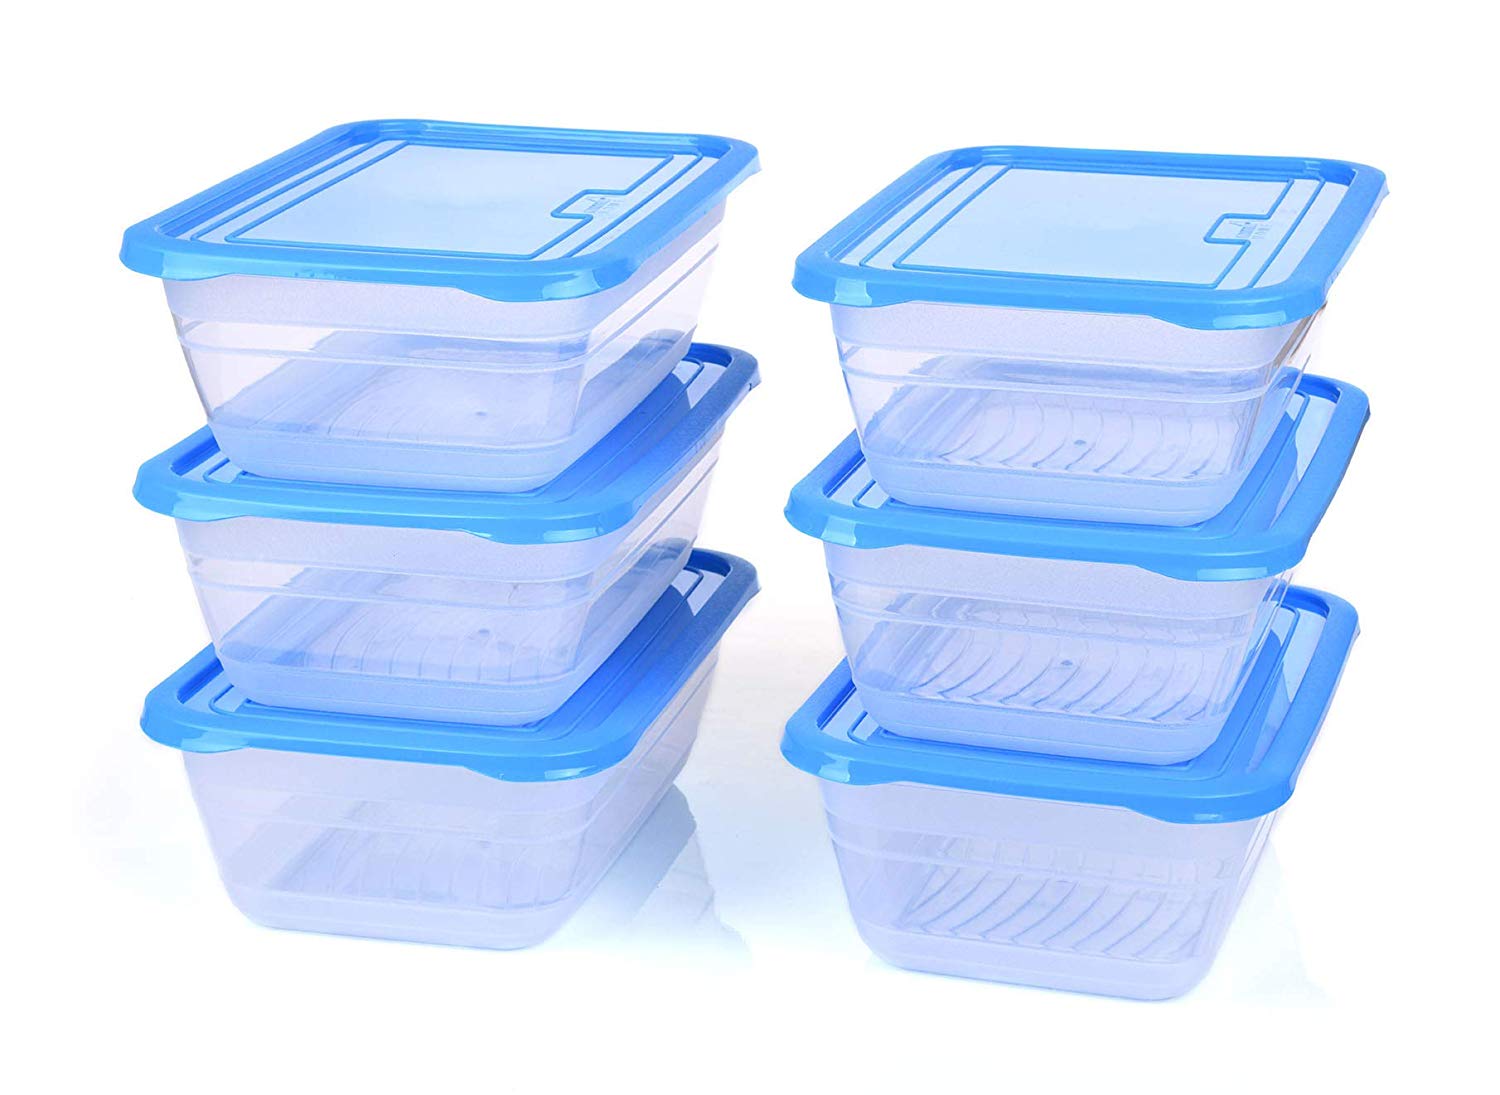 20 Pack of Small Round plastic Mini Storage Containers 2.3 fl oz. Container